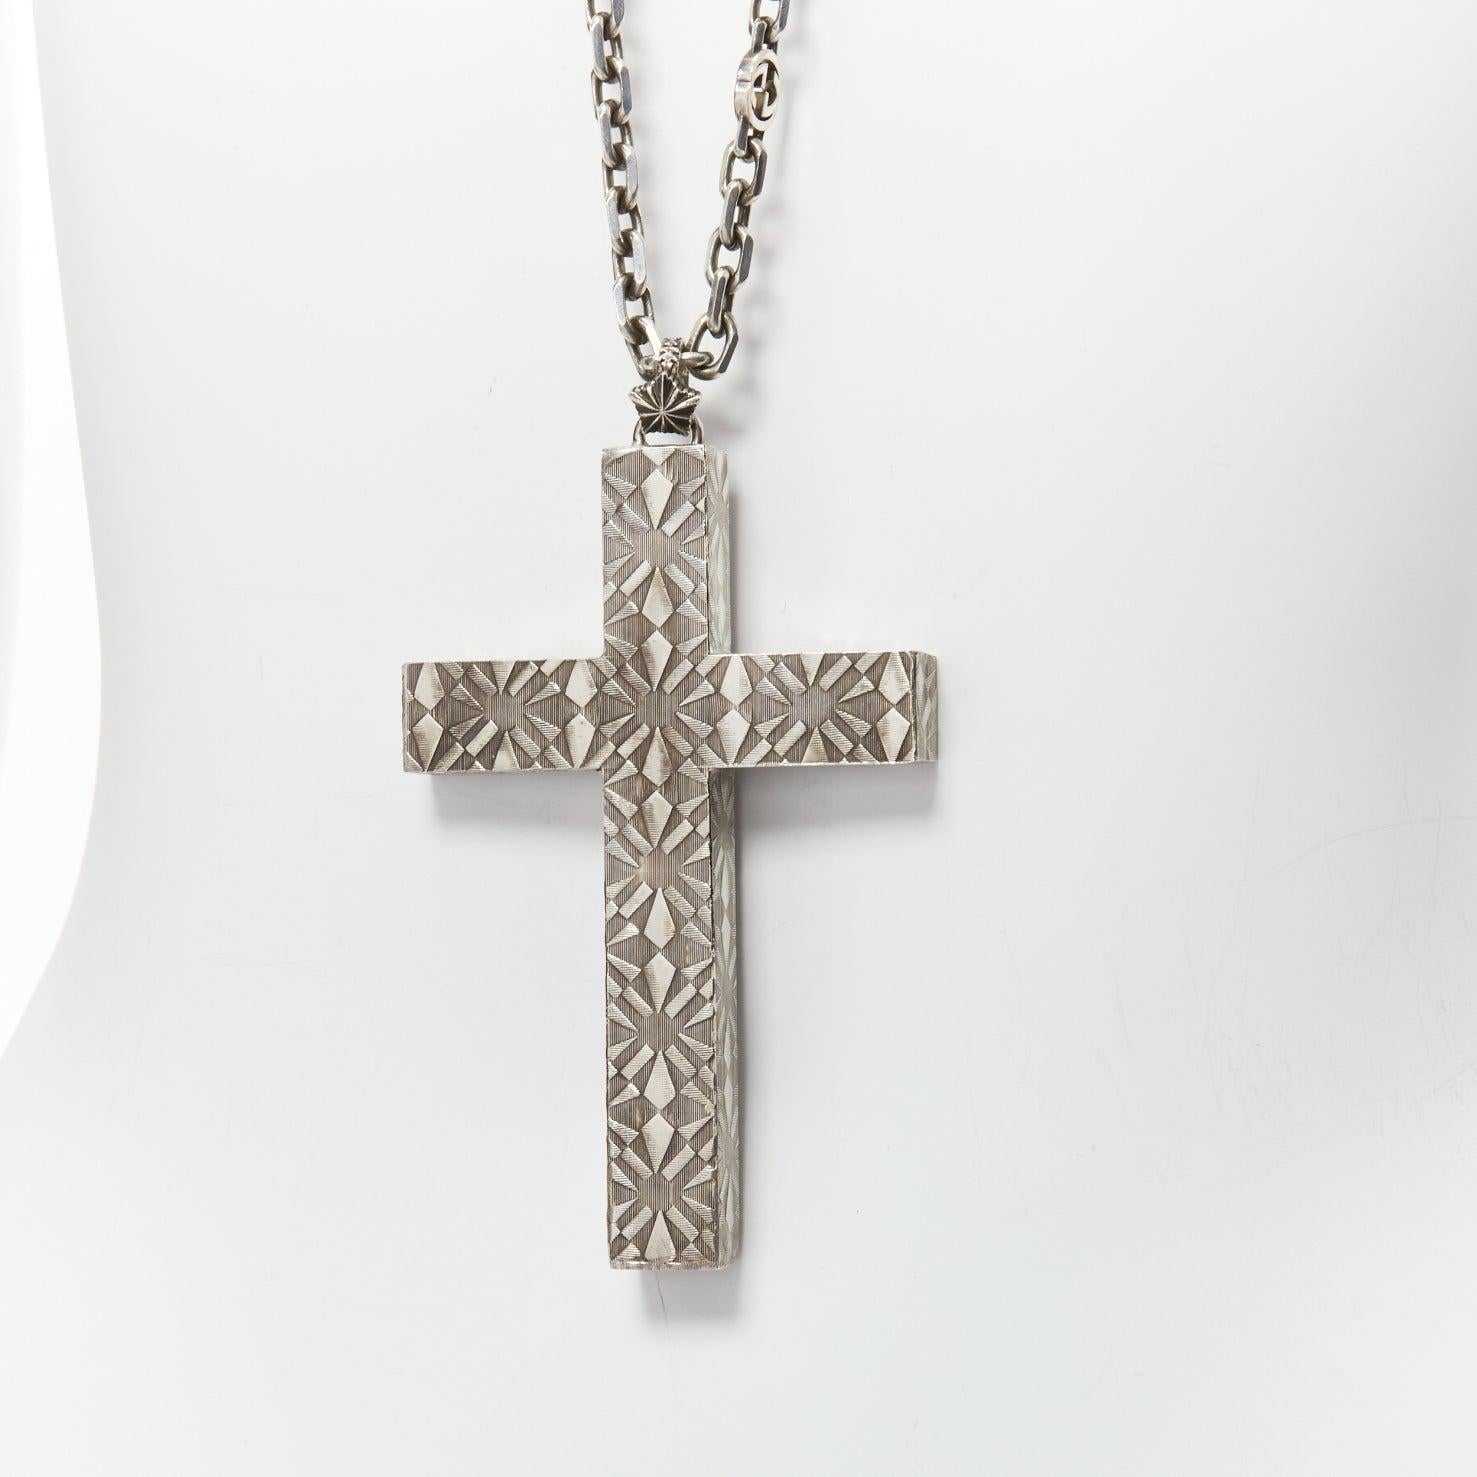 rare GUCCI Alessandro Michele GG logo sterling silver oversized Byzantine textured cross chain necklace
Reference: TGAS/D00533
Brand: Gucci
Designer: Alessandro Michele
Material: Metal
Color: Silver
Pattern: Geometric
Extra Details: Gg logo at